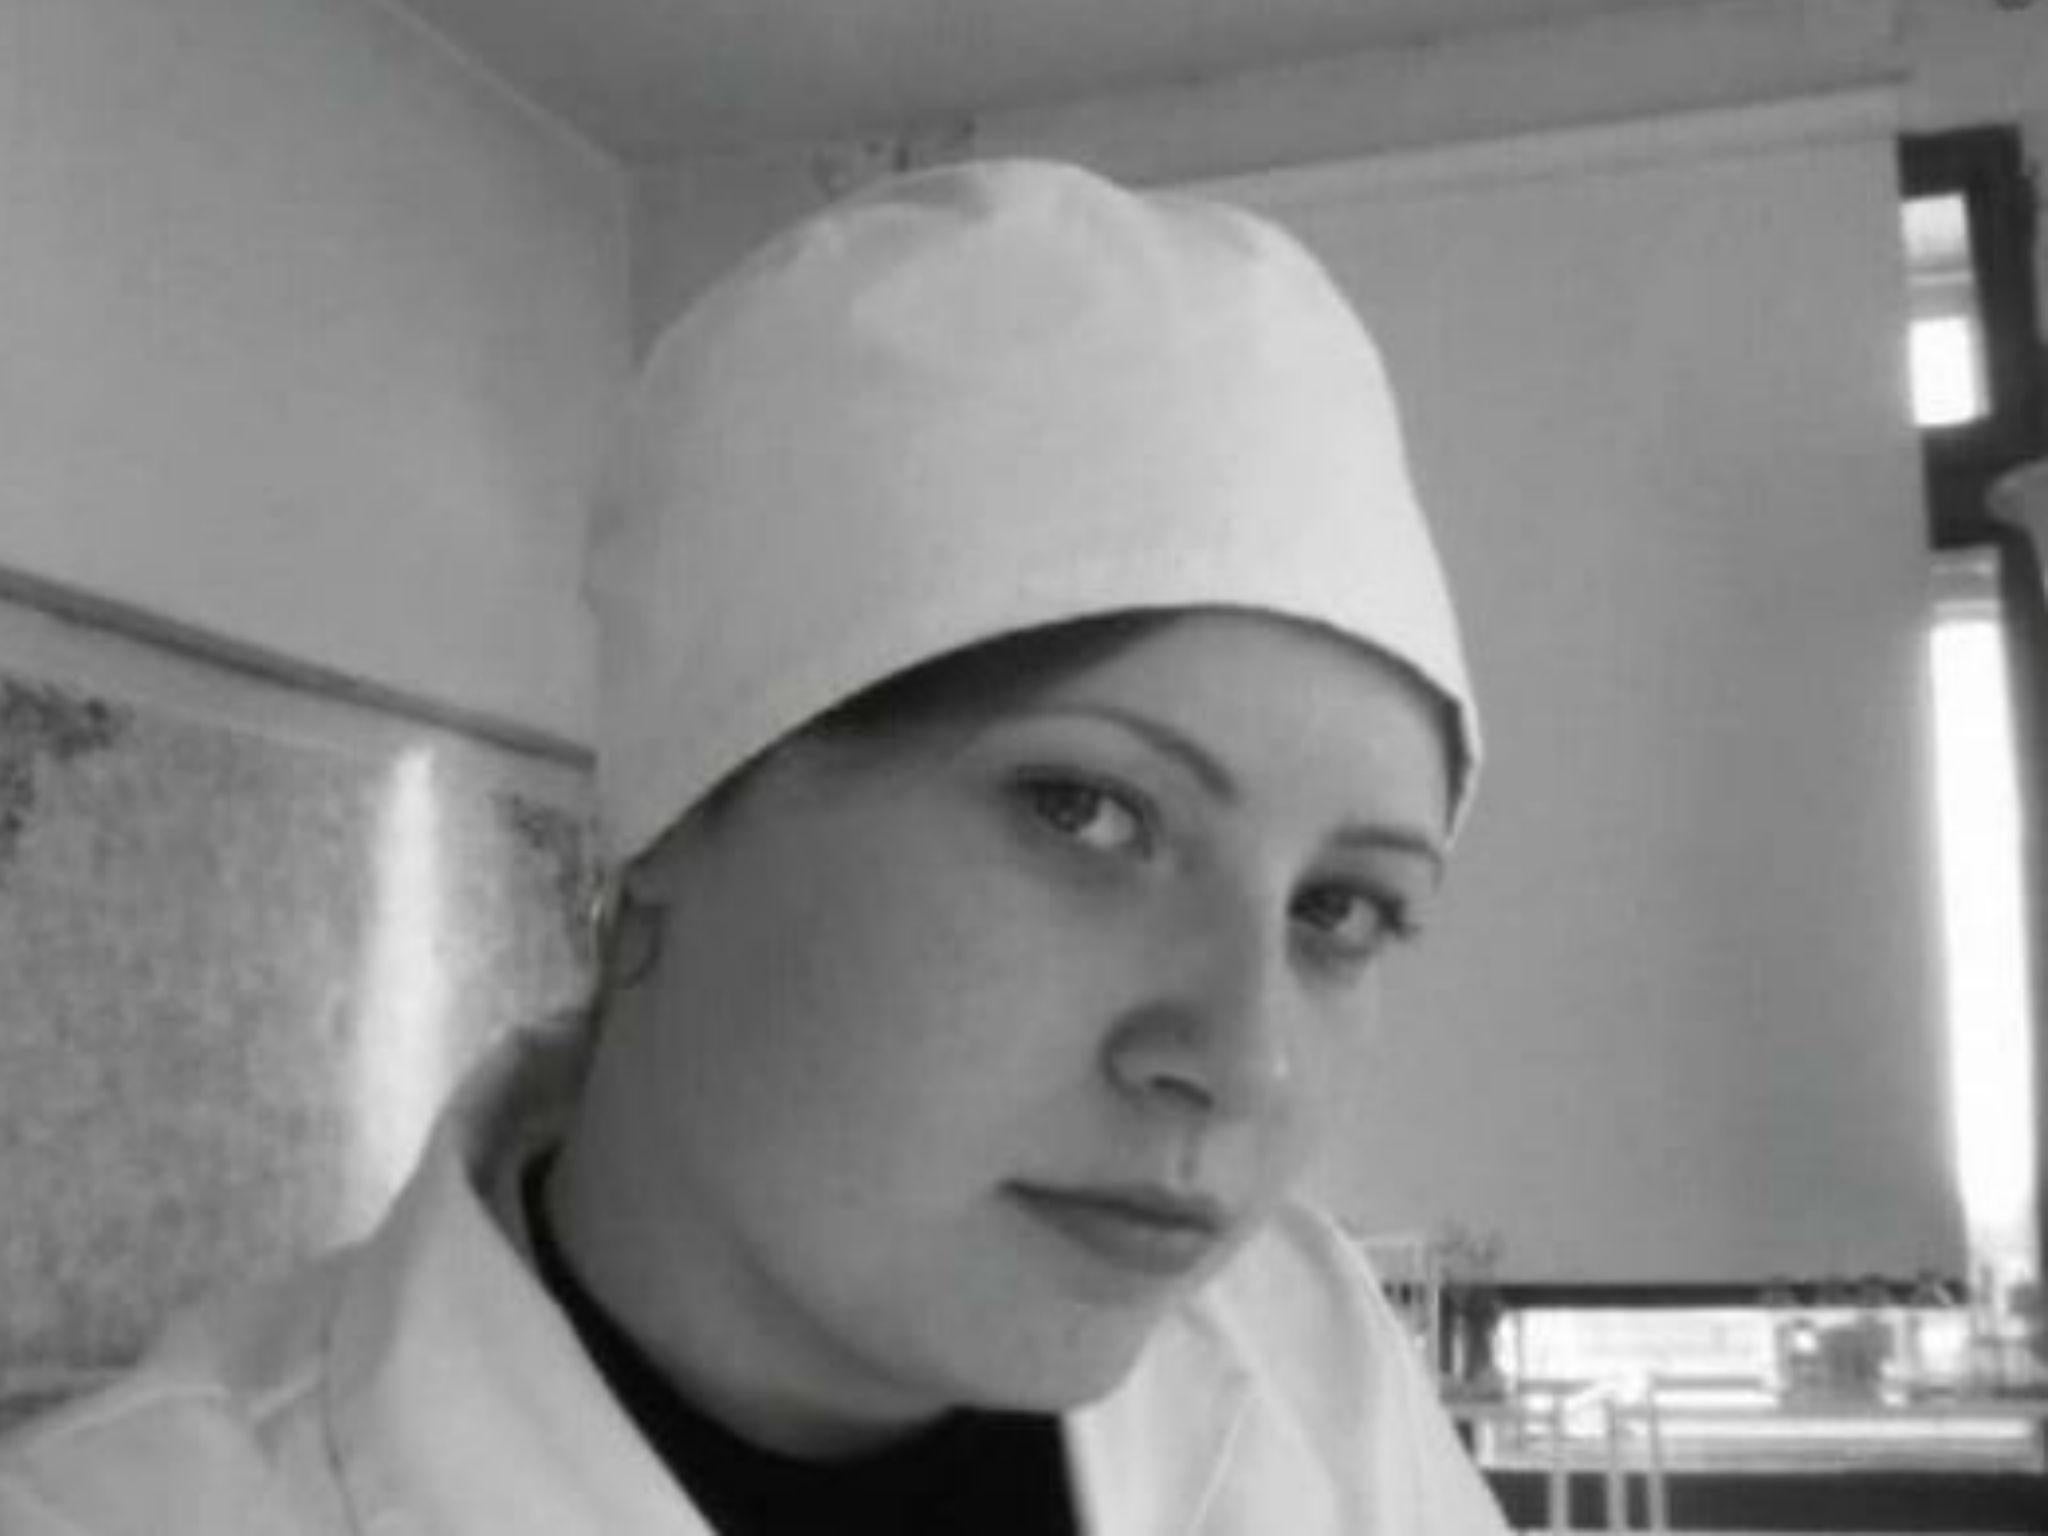 Svetlana Rosalina suffered a tragic accident while working at a sweet factory near Moscow